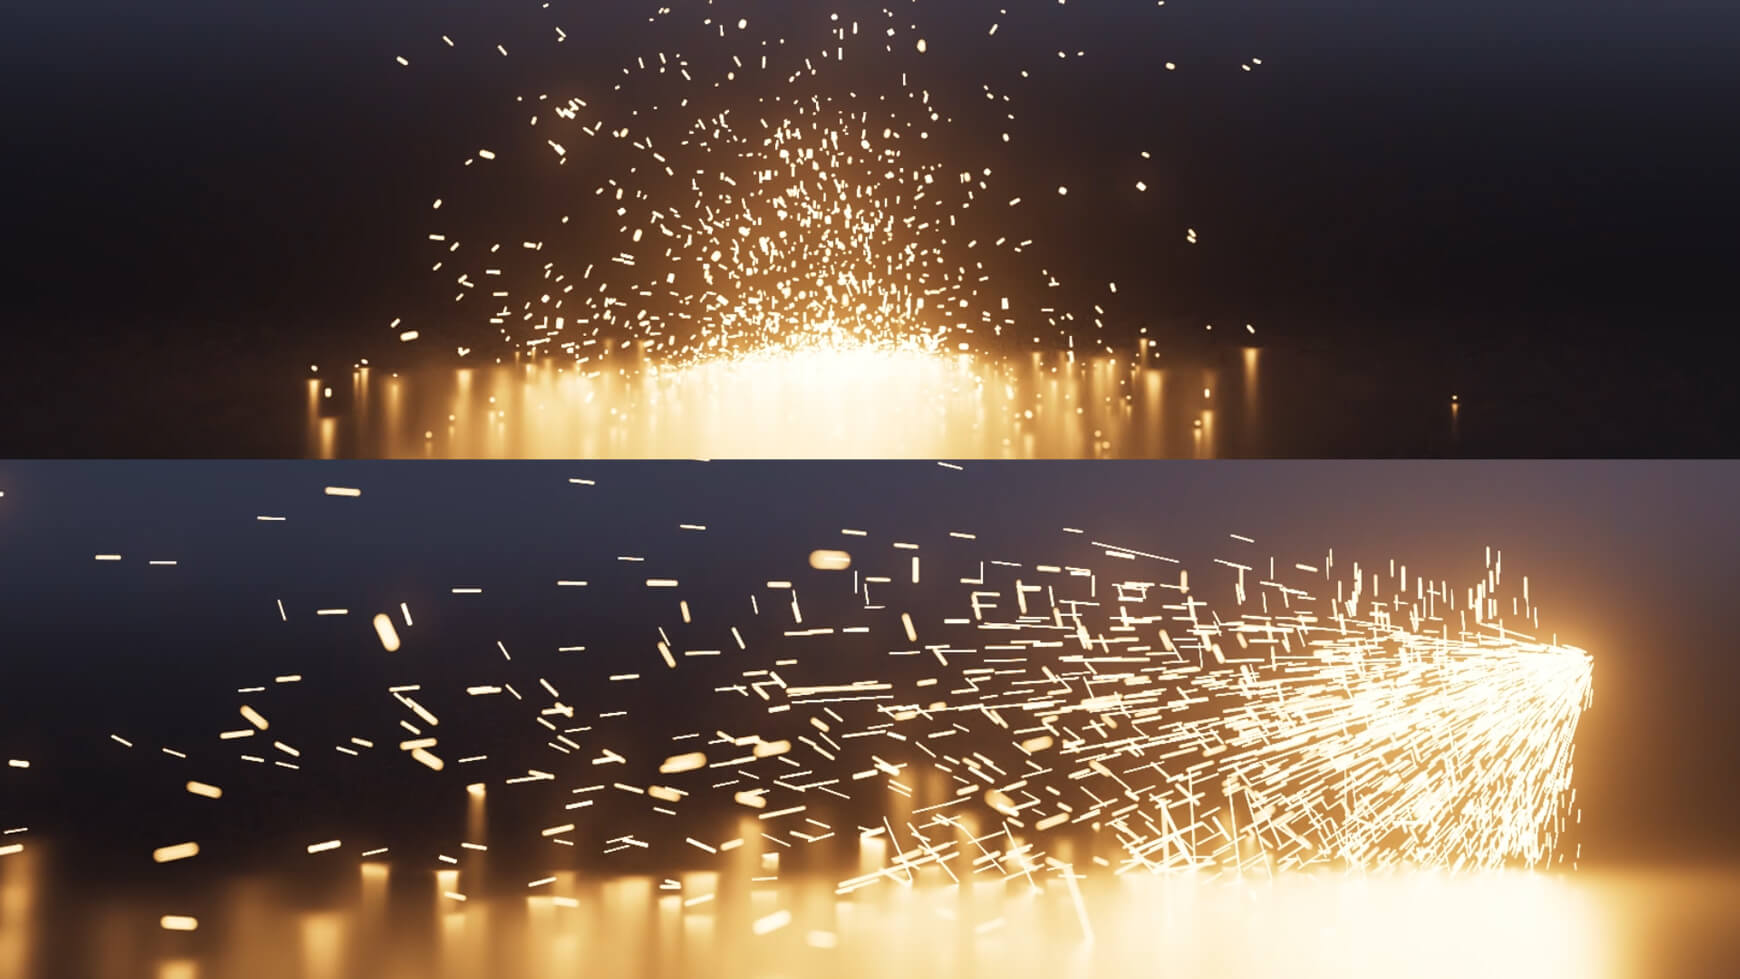 VFX Elements 15 Sparks Visual Effects